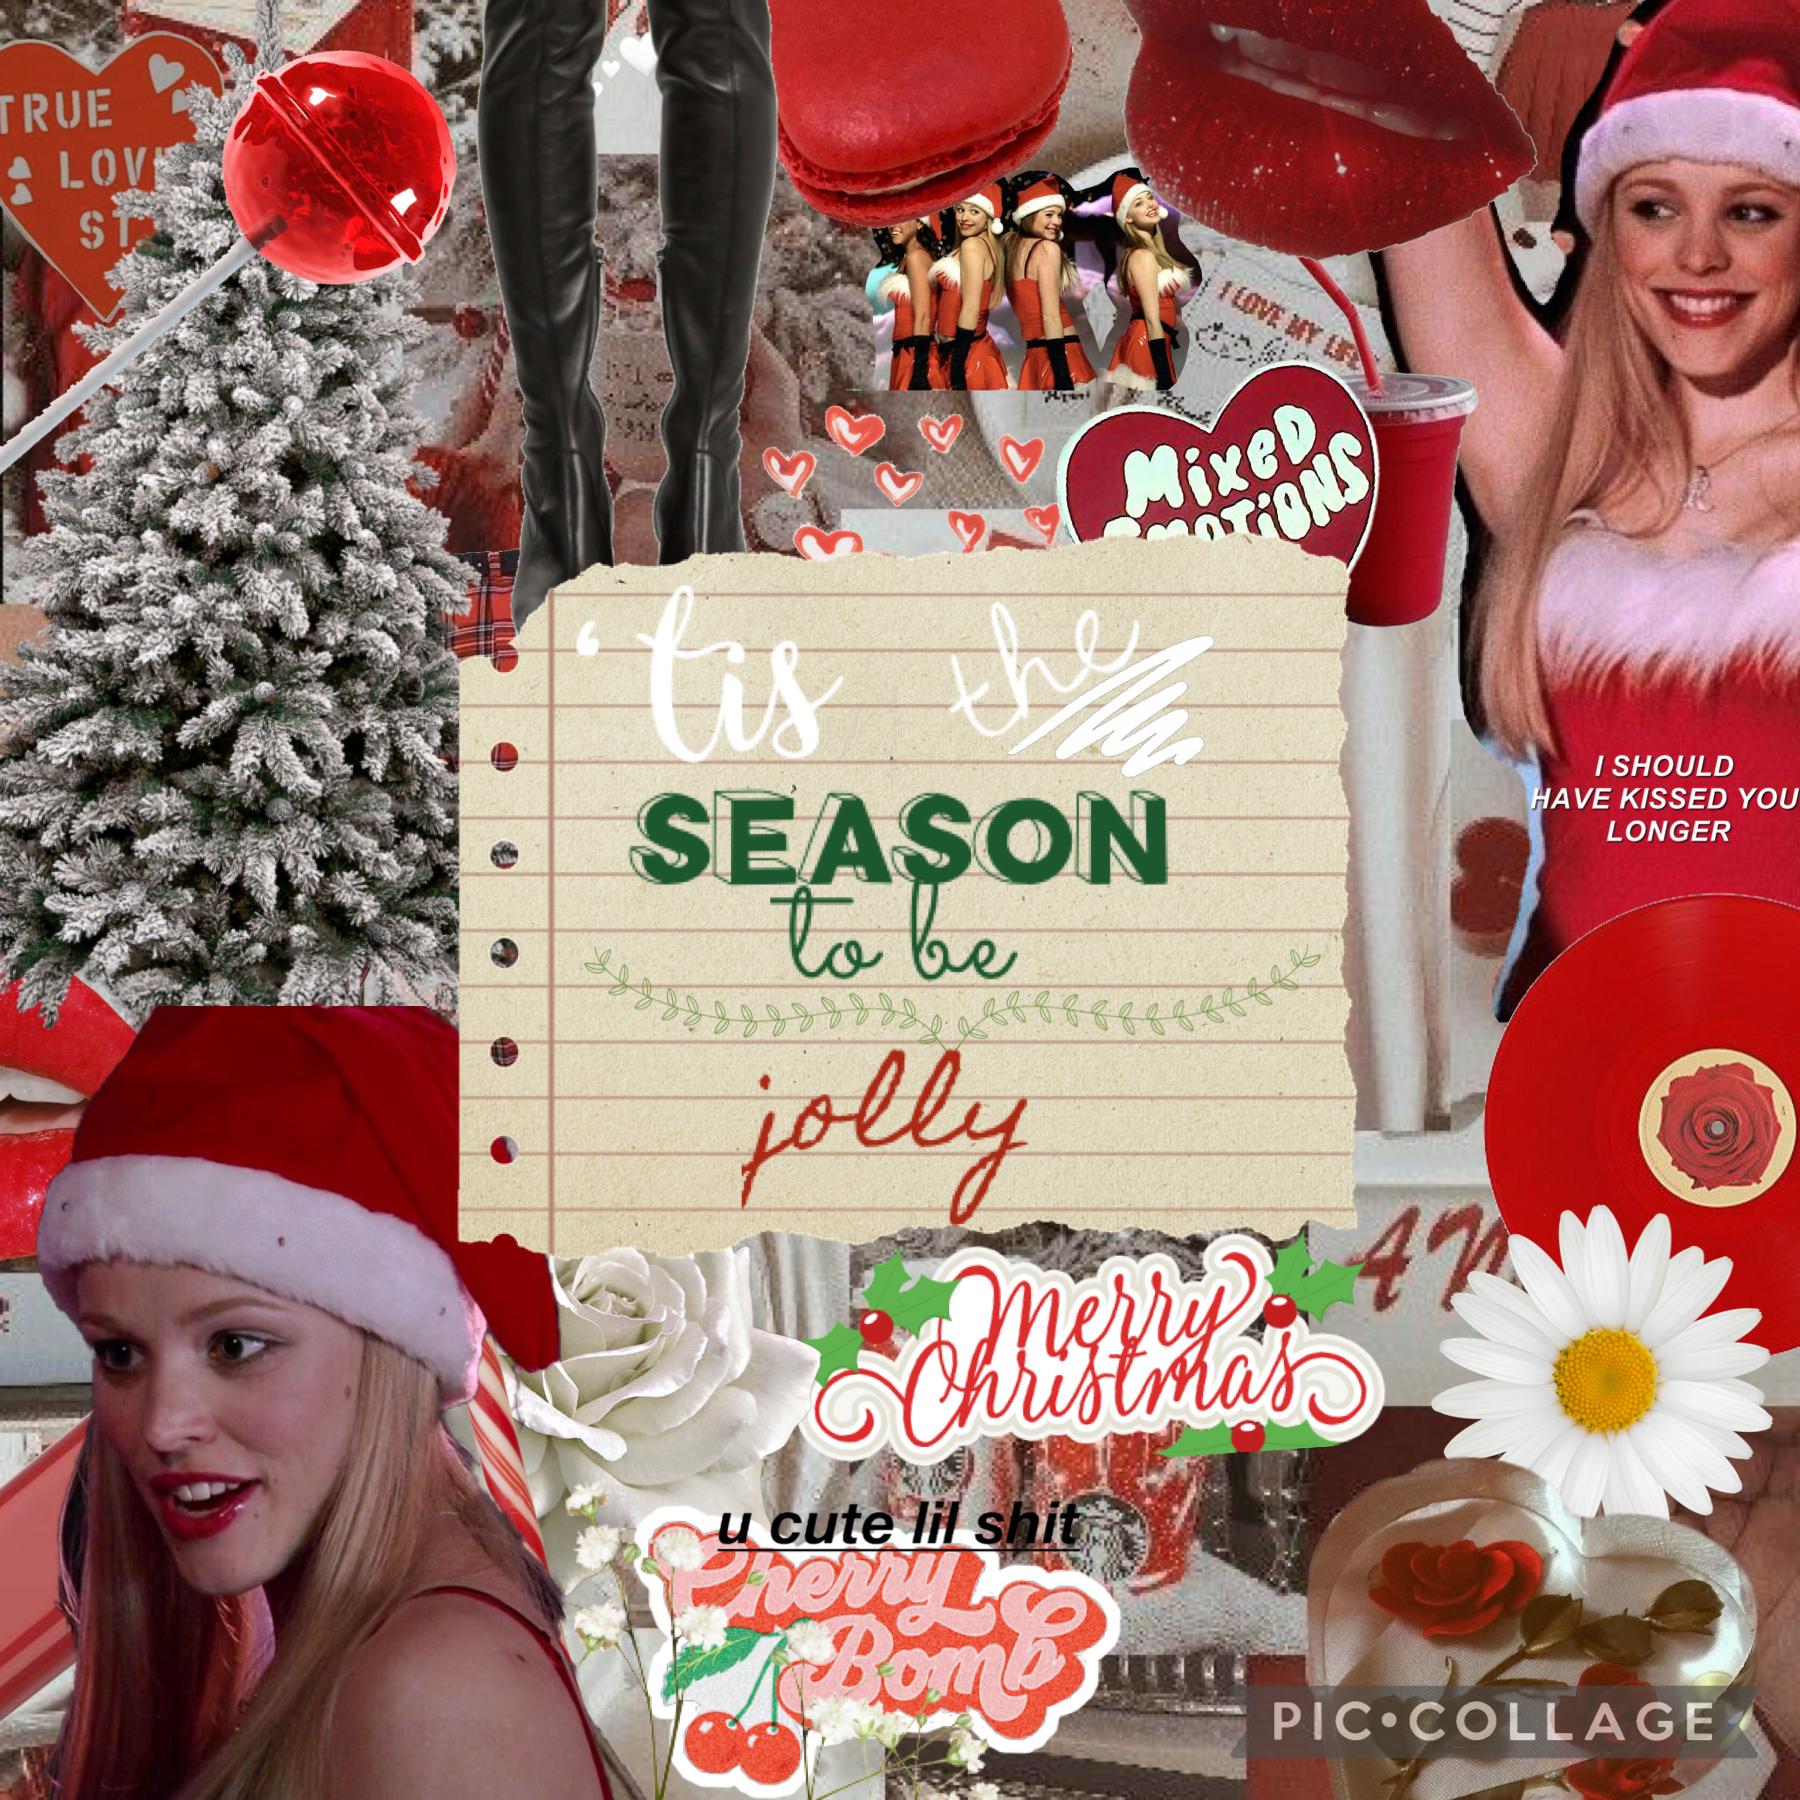 🎄25-12-2021🎄
merry christmas guyssss
have a wonderful day i didn’t want my collage to be that christmassy and it was veryyyy rushed. so here it is :)
qotd: what gifts have you gotten so far?
aotd: my family doesn’t really do gifts that much but i just got